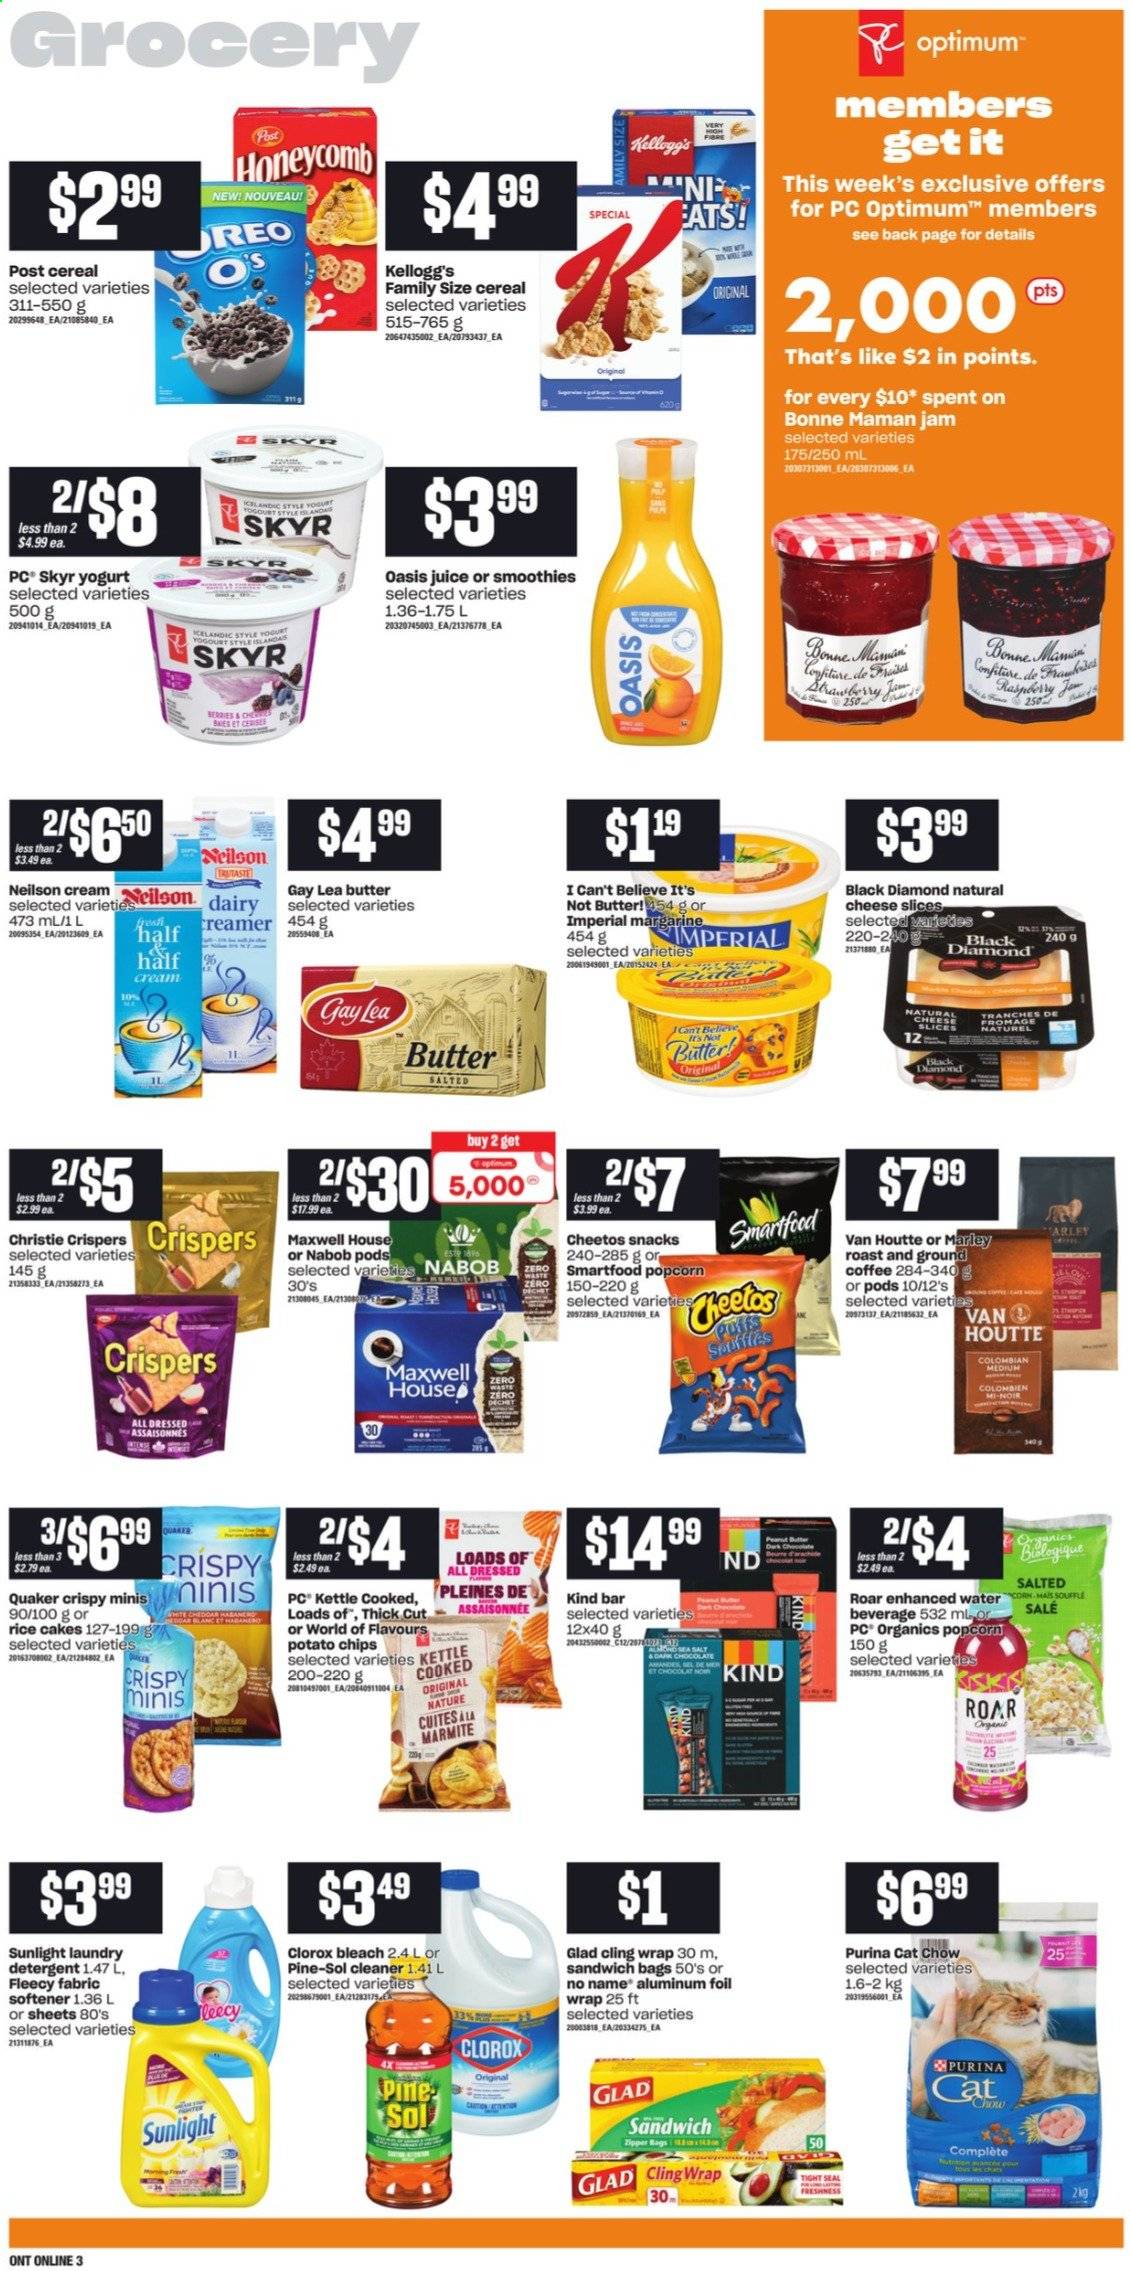 thumbnail - Independent Flyer - August 19, 2021 - August 25, 2021 - Sales products - corn, No Name, Quaker, sliced cheese, cheese, yoghurt, butter, margarine, I Can't Believe It's Not Butter, creamer, chocolate, snack, Kellogg's, potato chips, Cheetos, Smartfood, popcorn, cereals, fruit jam, juice, Maxwell House, coffee, ground coffee, cleaner, bleach, Clorox, Pine-Sol, fabric softener, laundry detergent, Sunlight, bag, aluminium foil, Purina, Optimum, chips. Page 6.